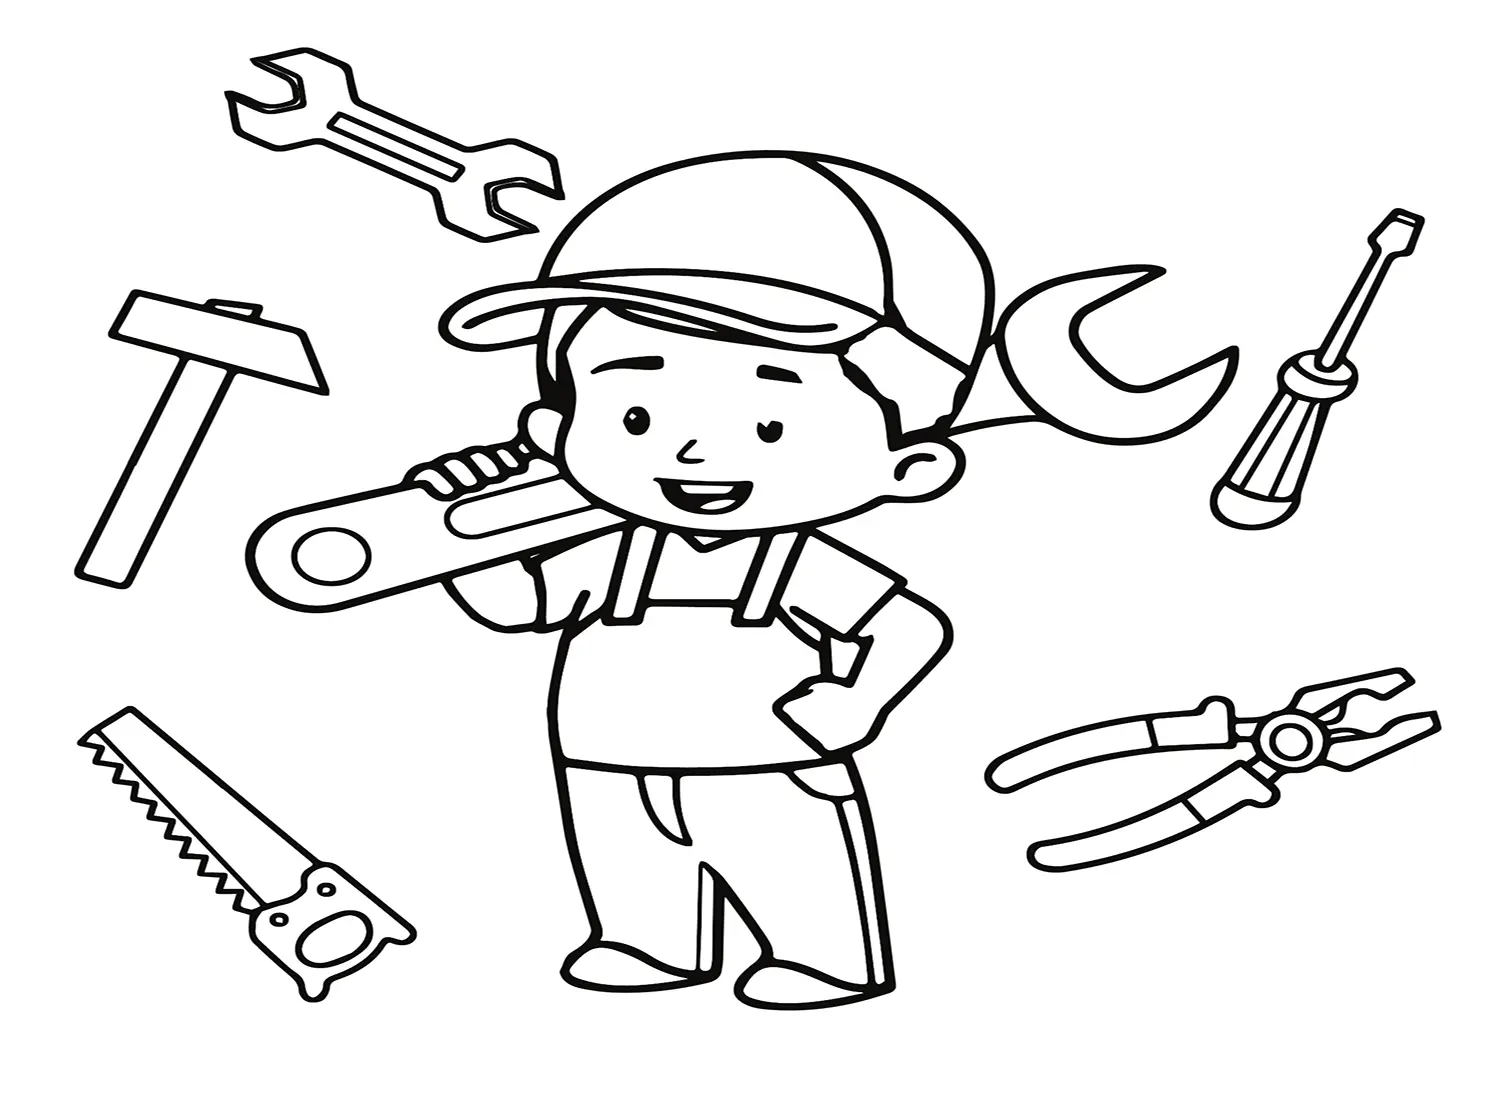 Wrench Coloring Pages